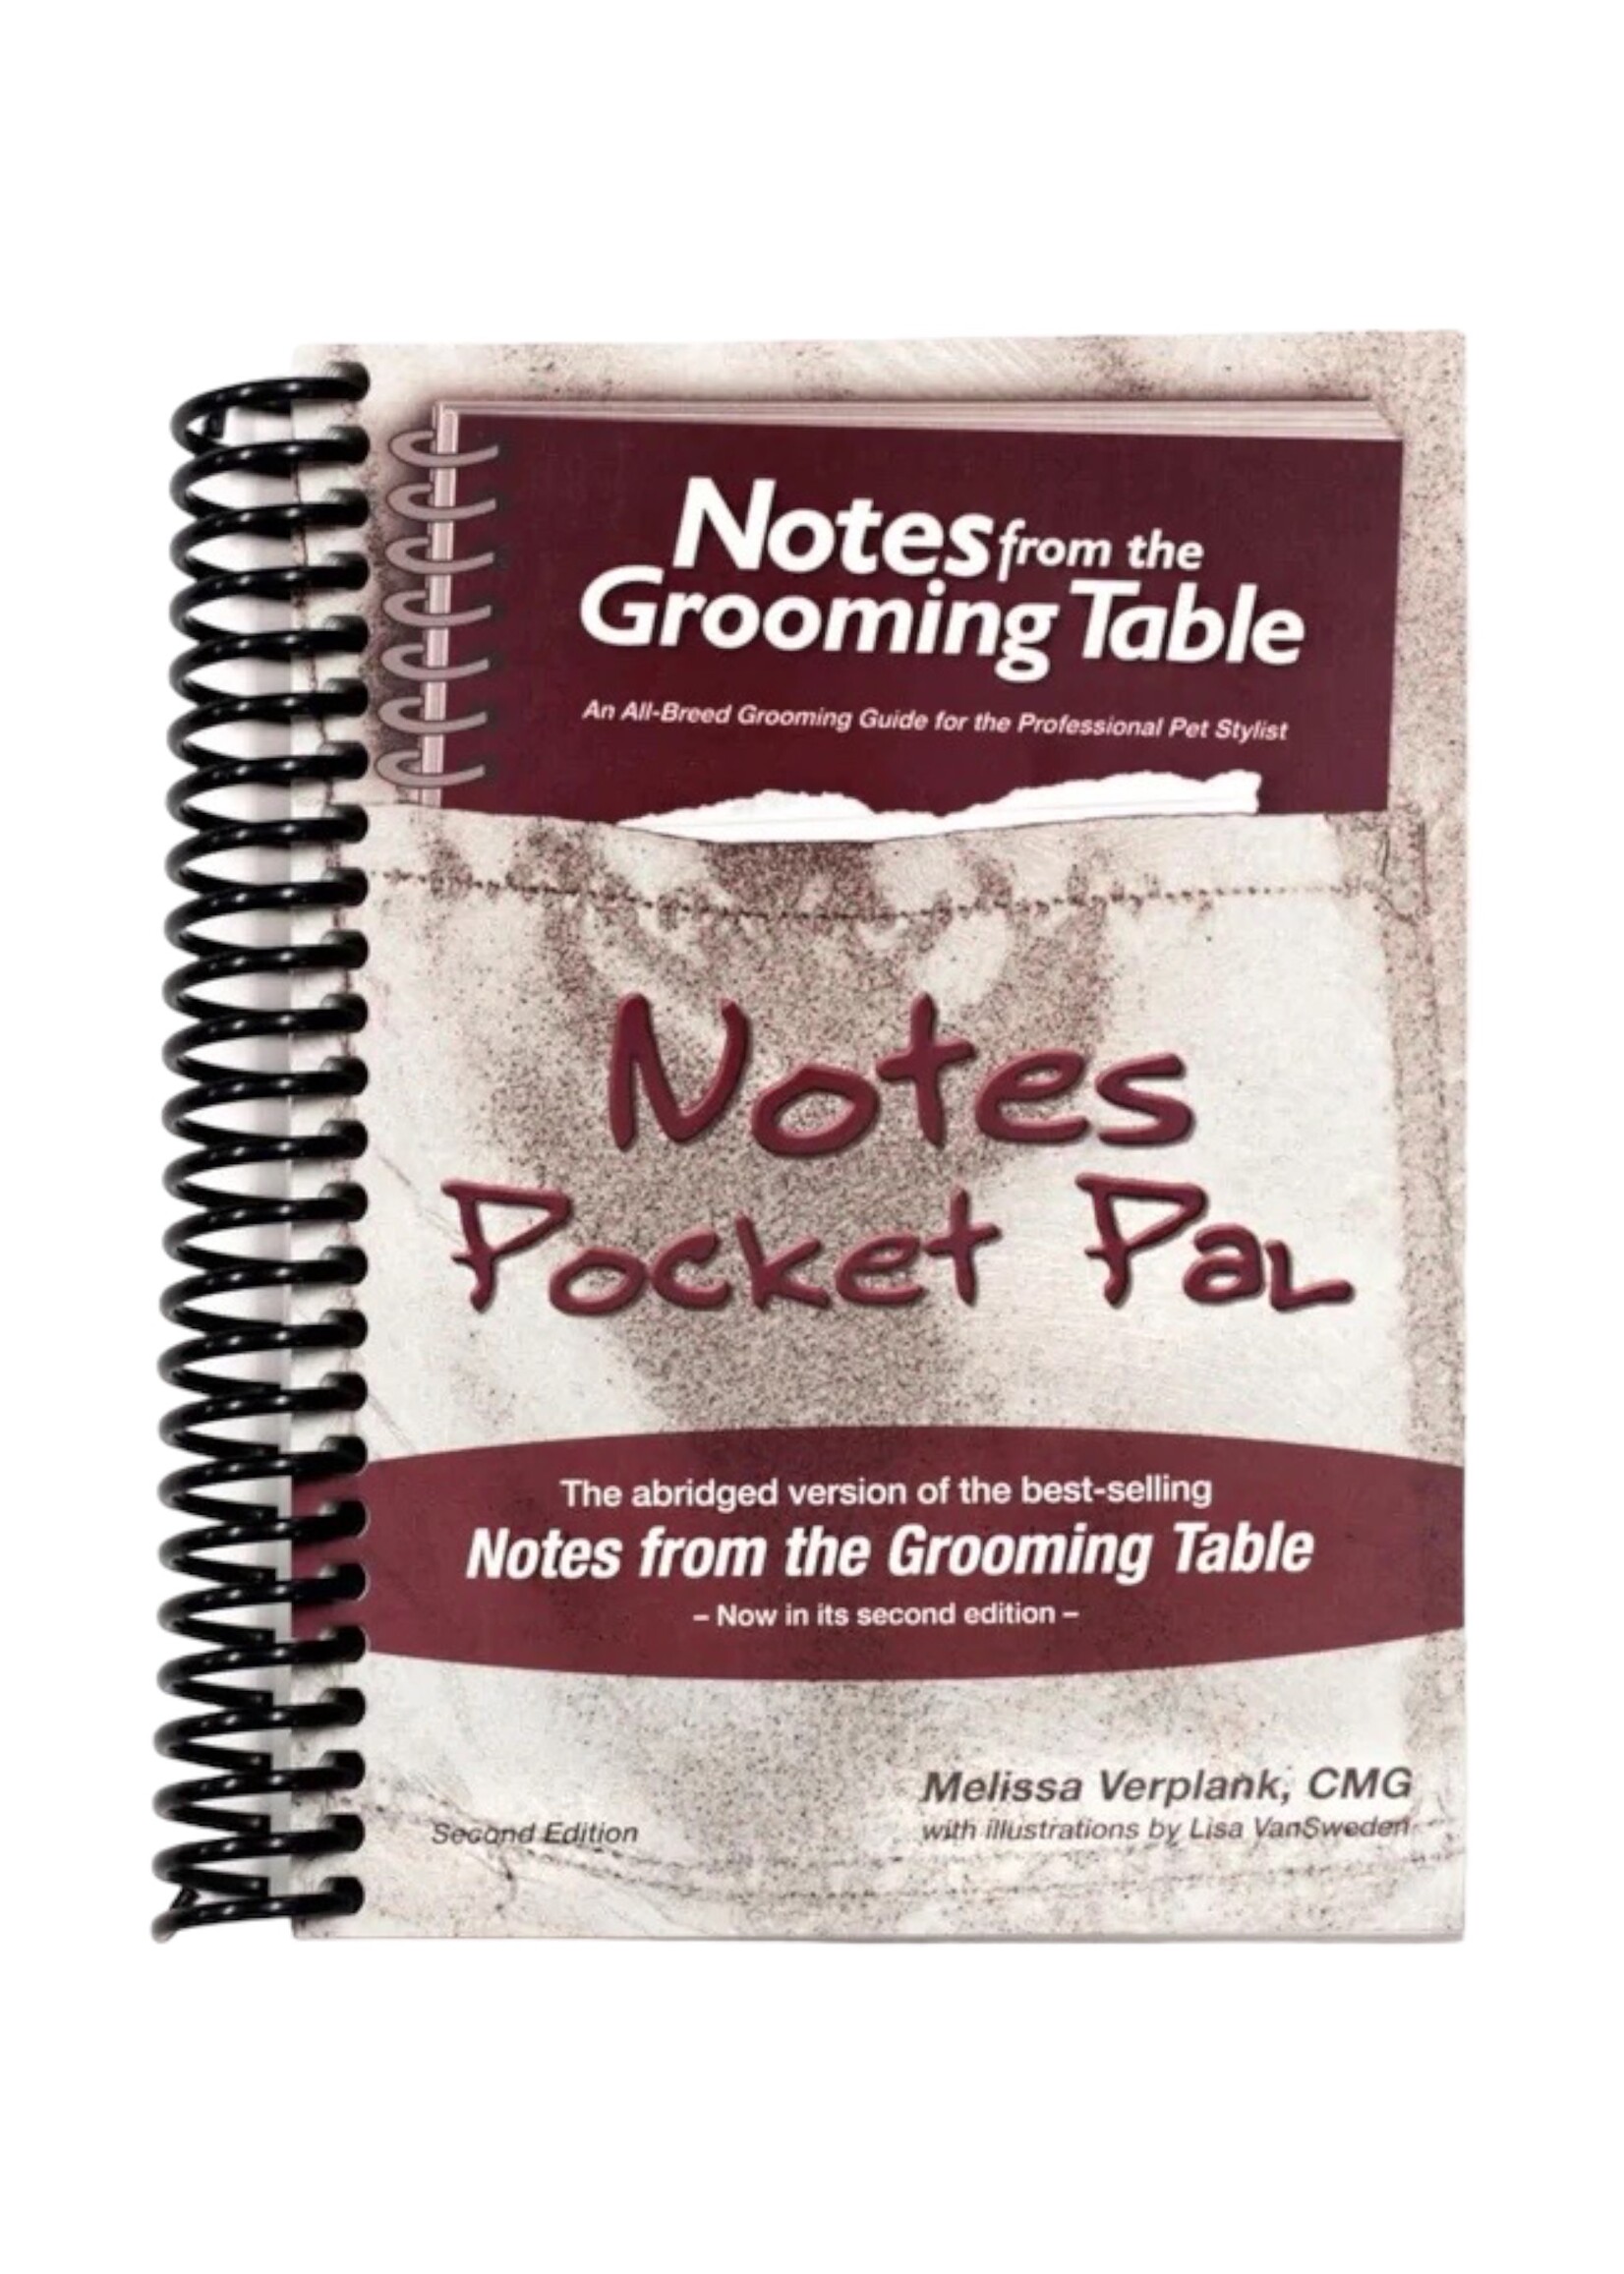 White Dog Enterprises Notes From the Grooming Table Pocket Pal-2nd Edition